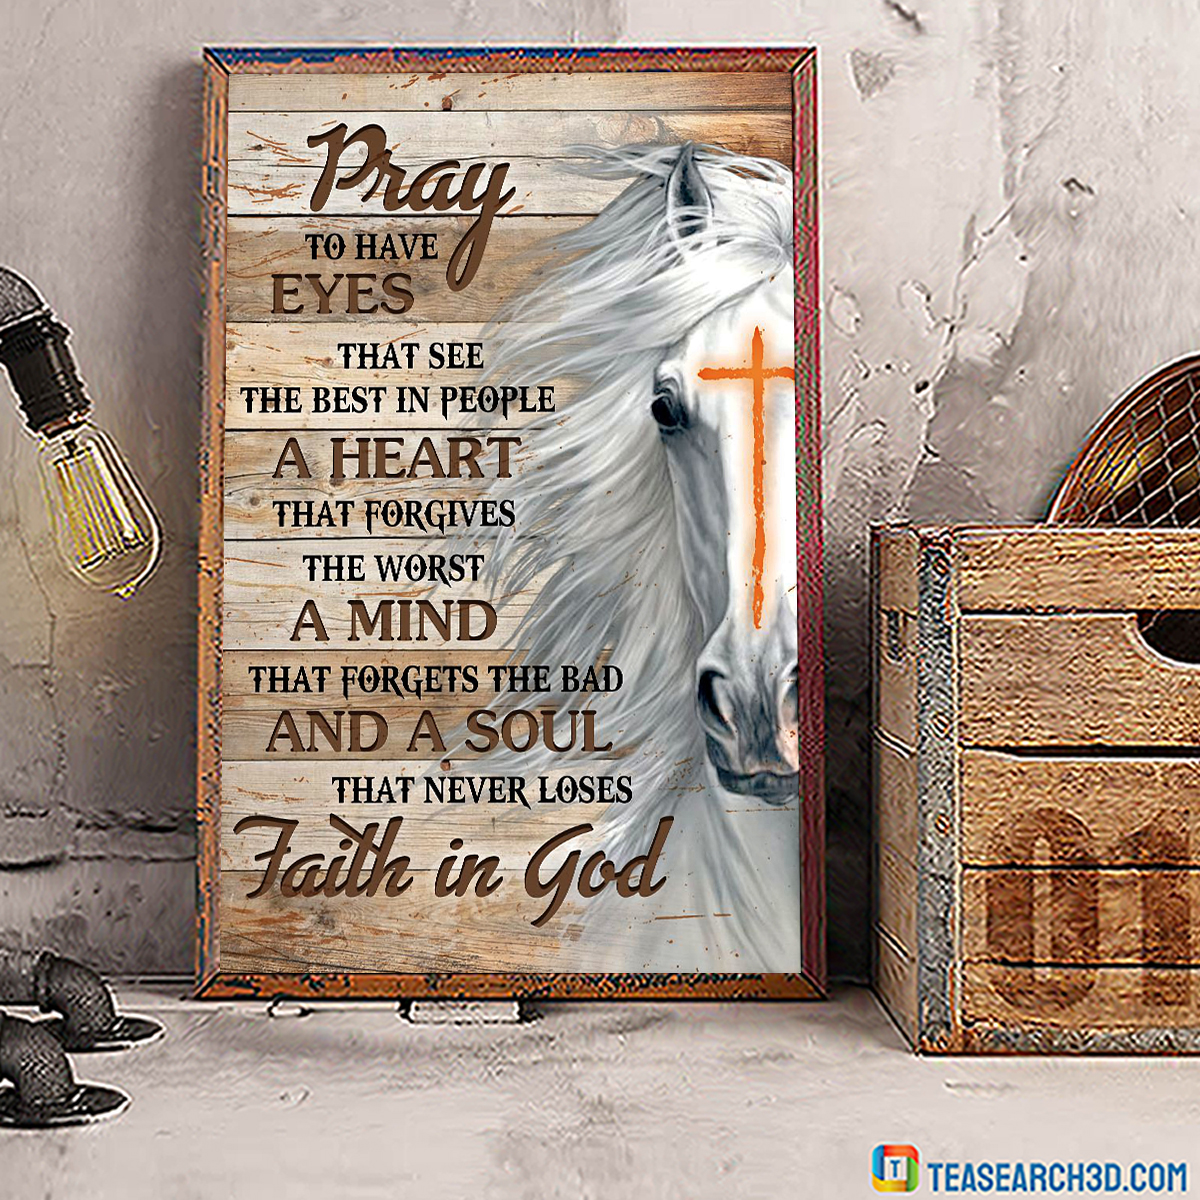 Horse faith in god pray to have eyes poster A1